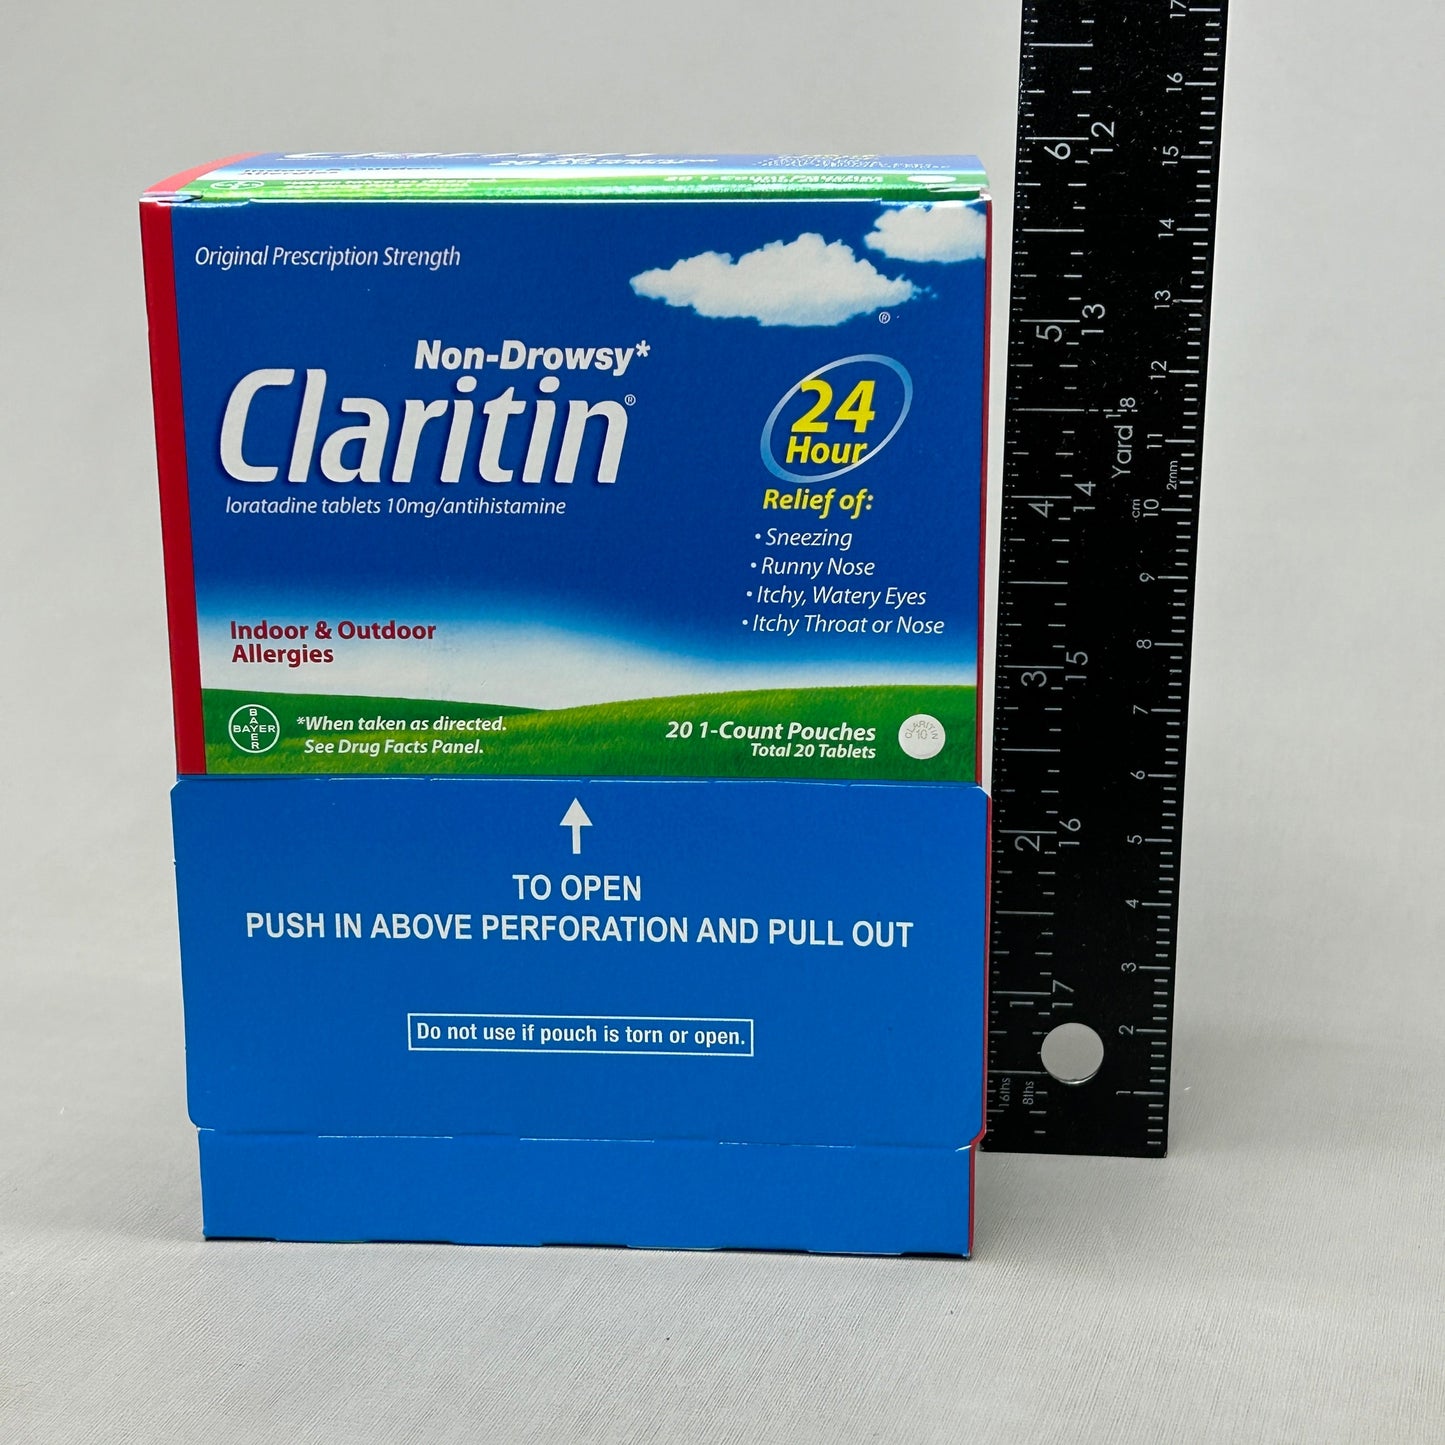 CLARITIN (2PK, 40 Total Tablets) Non-Drowsy Loratadine 24 Hour Allergies 07/25